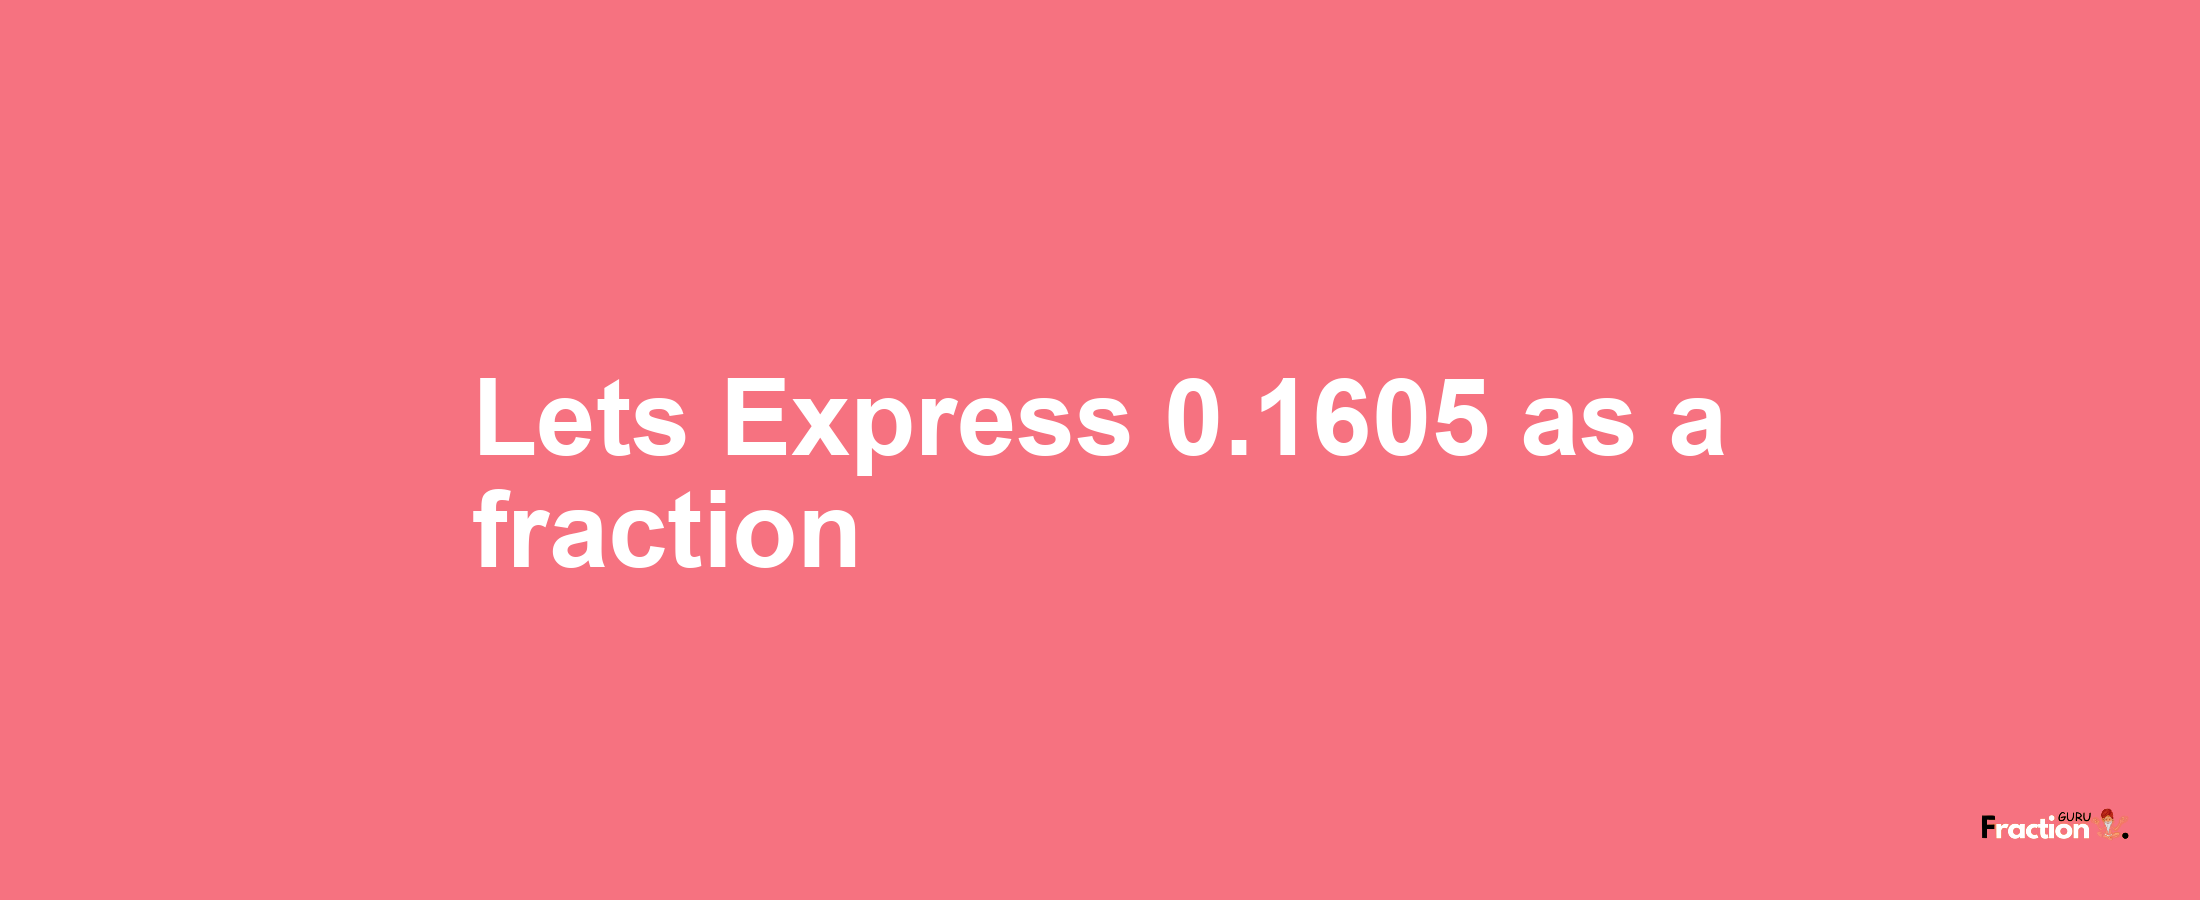 Lets Express 0.1605 as afraction